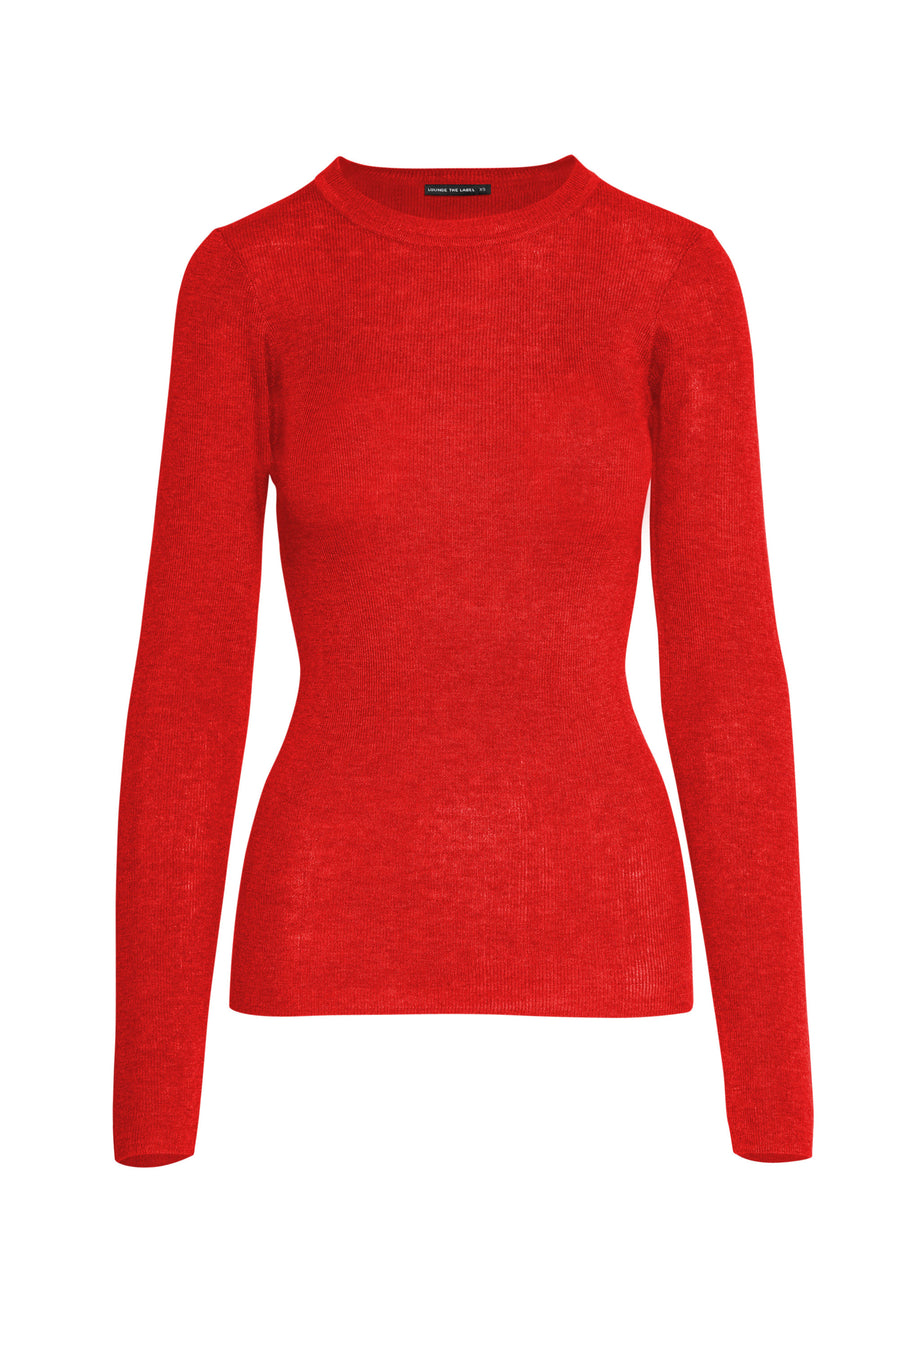 Lounge the Label II BERLIN wool mix basic top - red